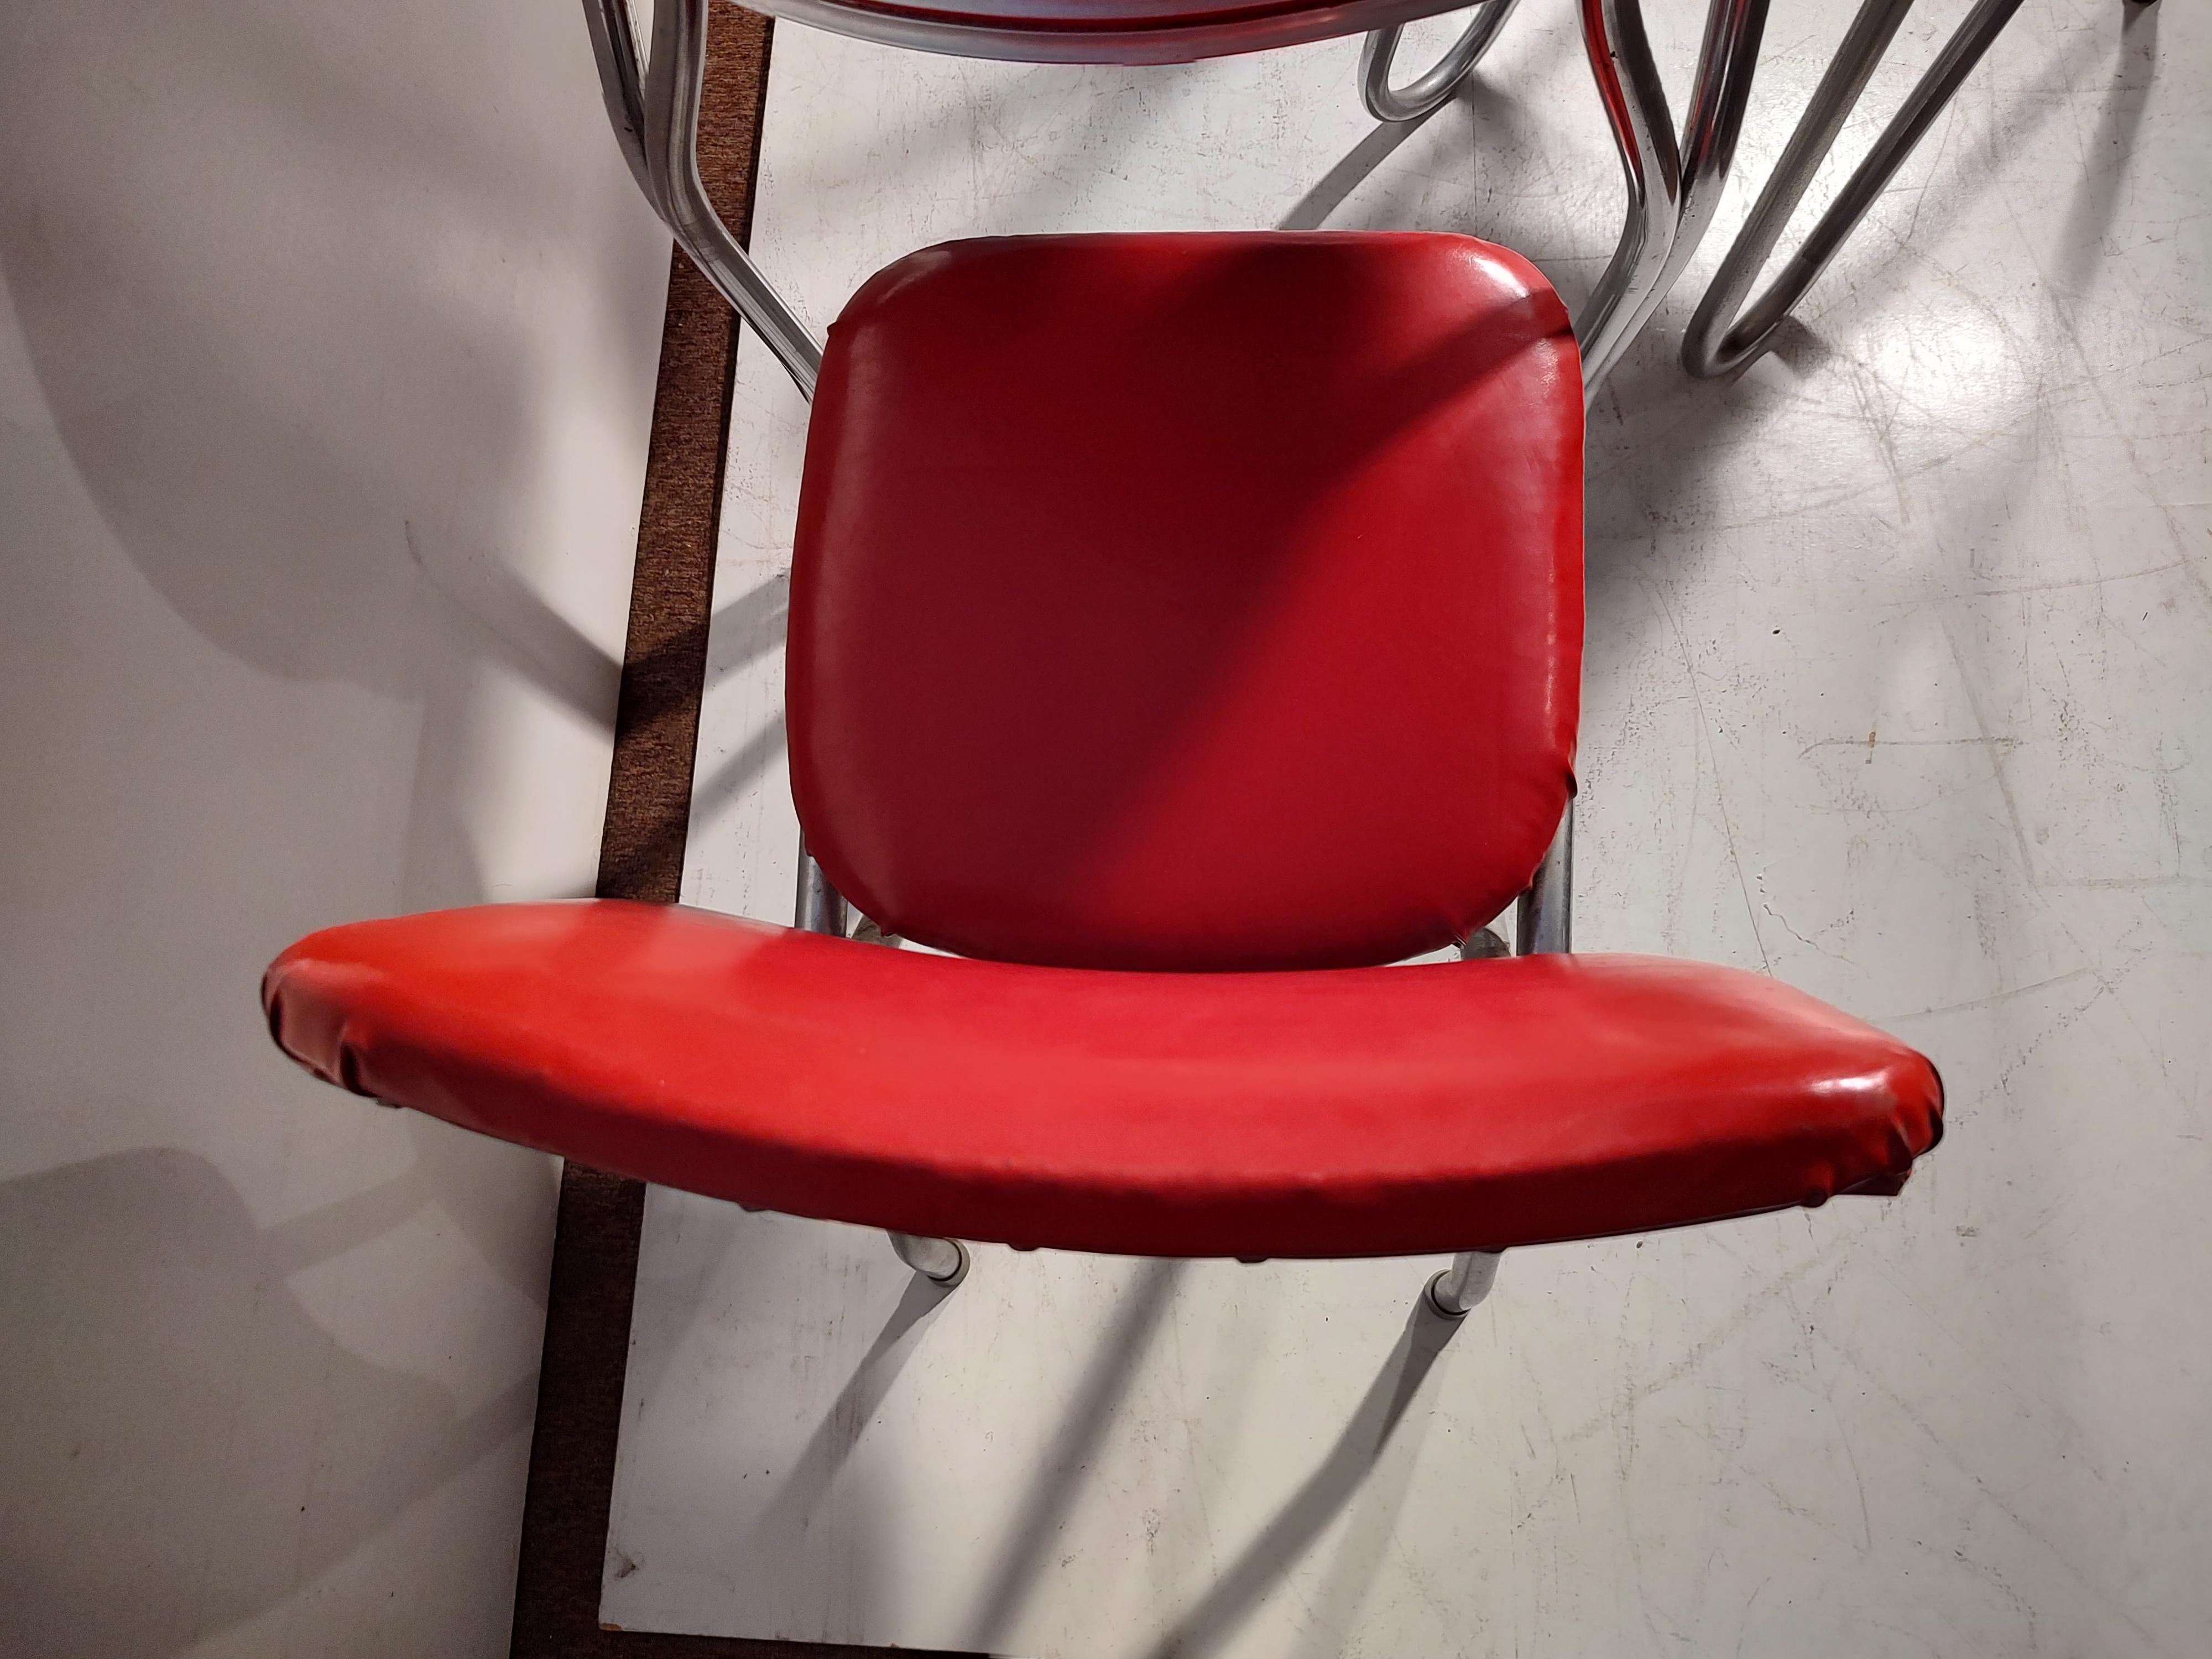 Naugahyde C1950 Mid Century Chrome & Formica Dining Table & 4 Red Vinyl Sculptural Chairs